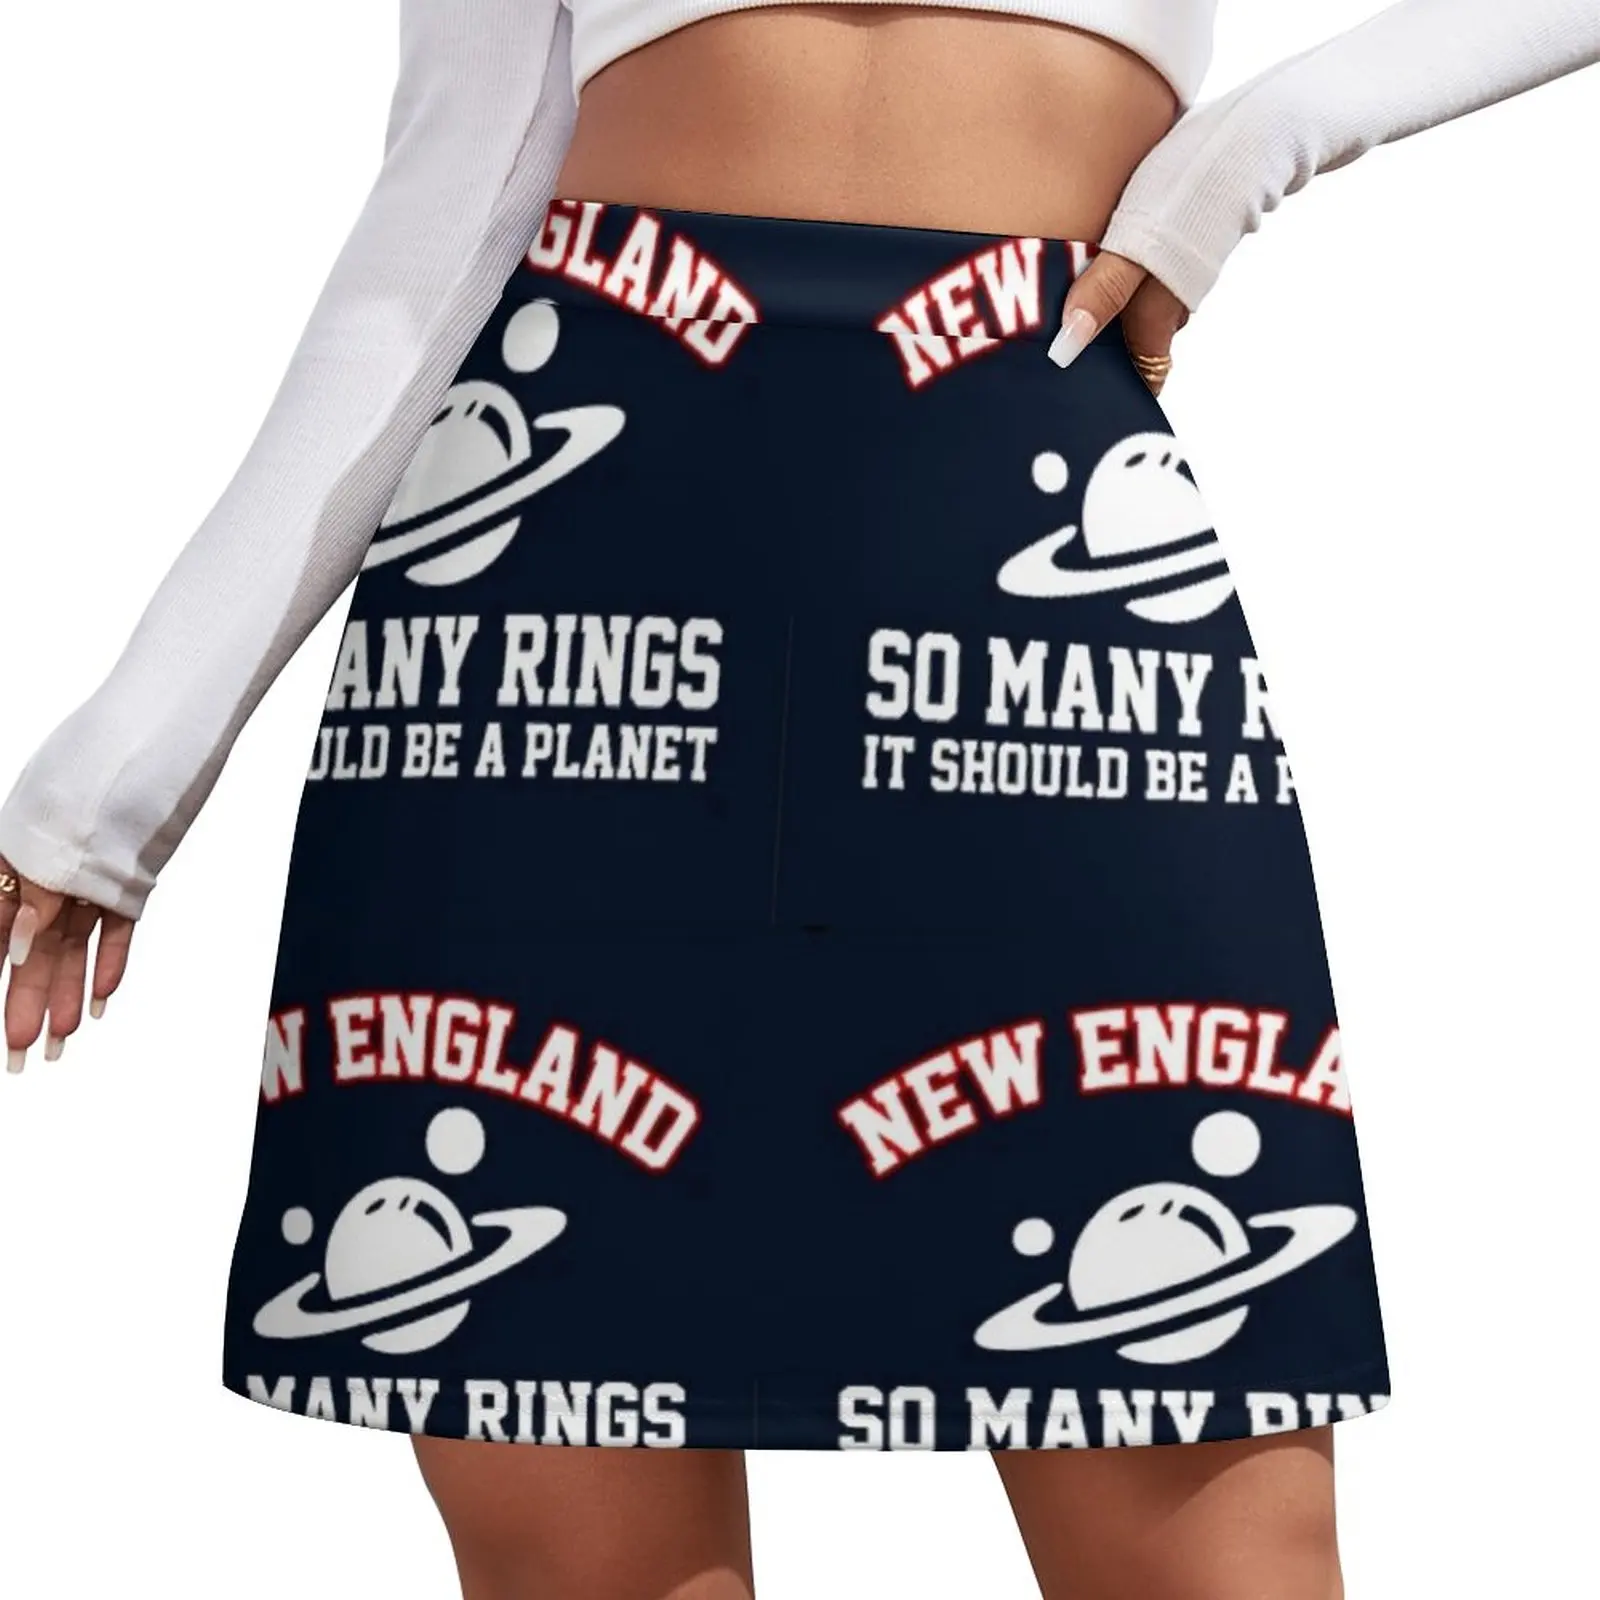 So Many Rings!! Pat's Nation Mini Skirt luxury evening dresses 2023 skorts for women women clothing 2023 new arrivals belt skirt hikes rings leathers loop adult accessory strap for women